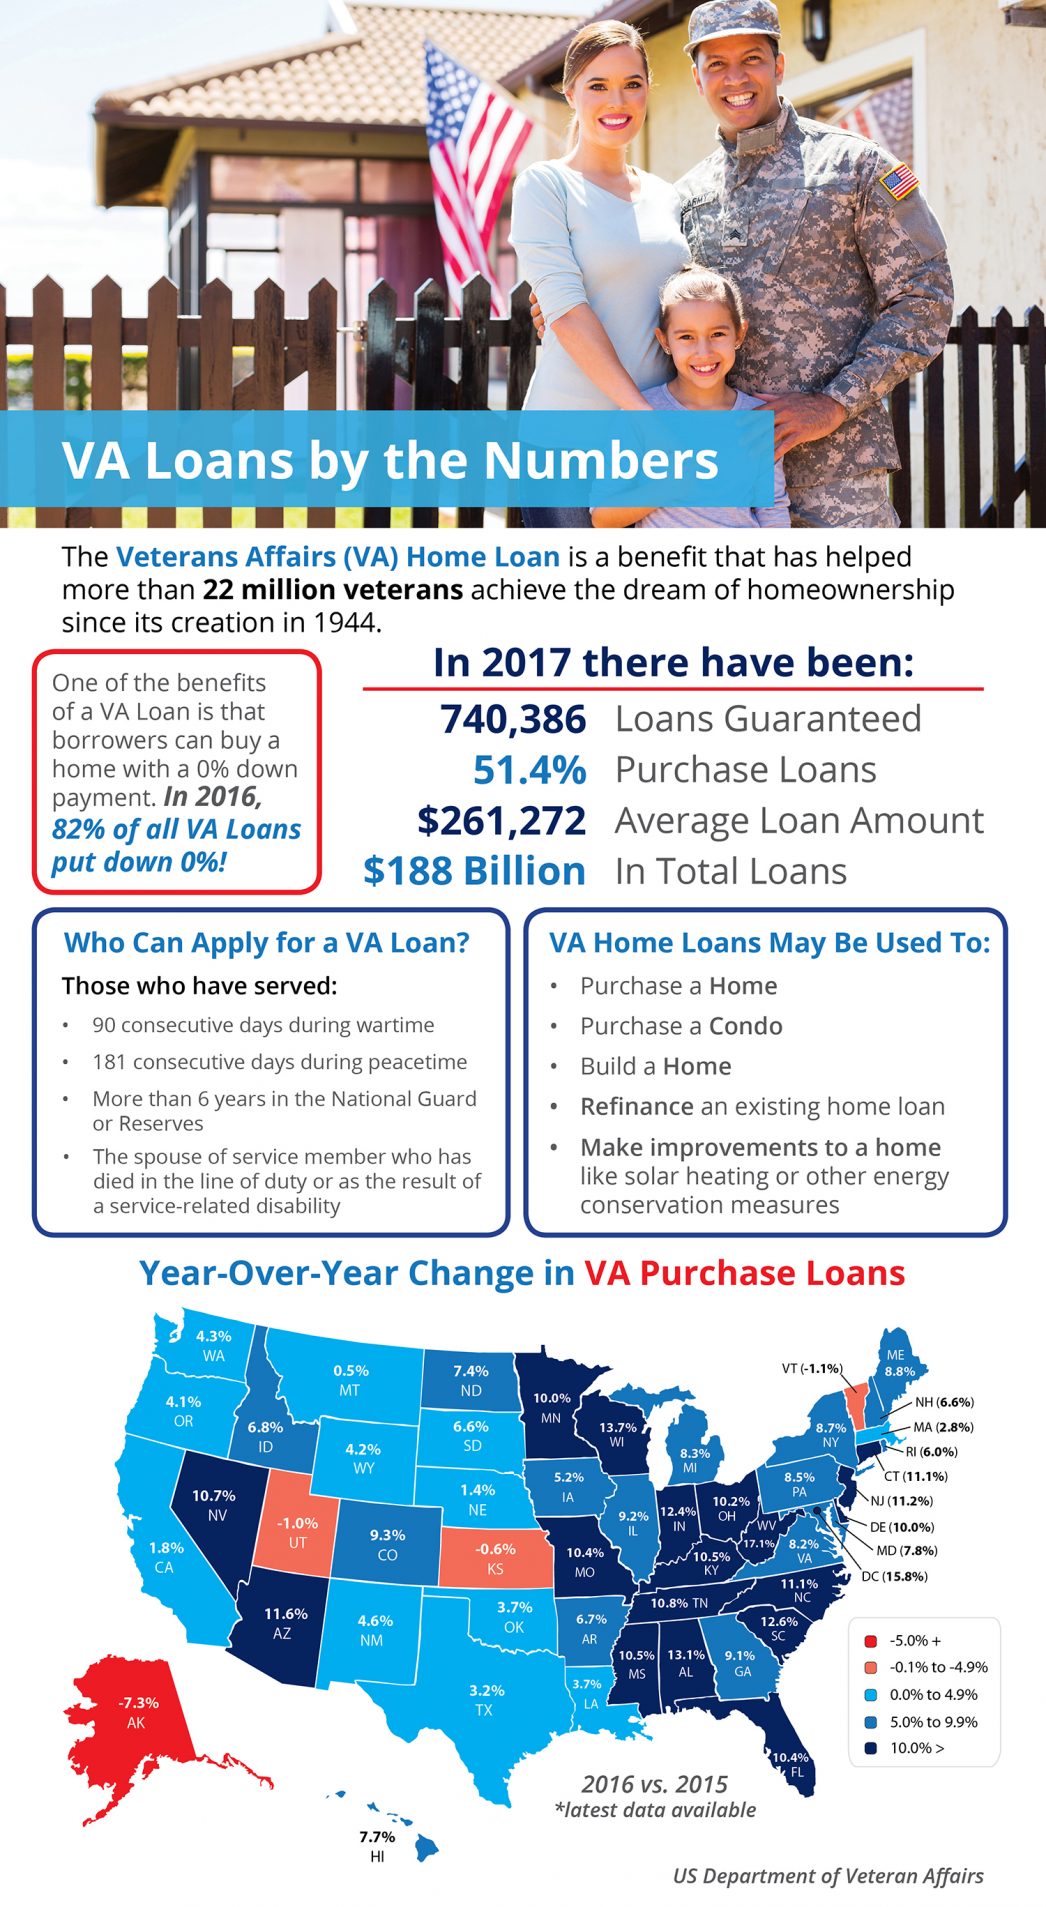 VA-Loans-by-the-Numbers-STM-1046x1907.jpg